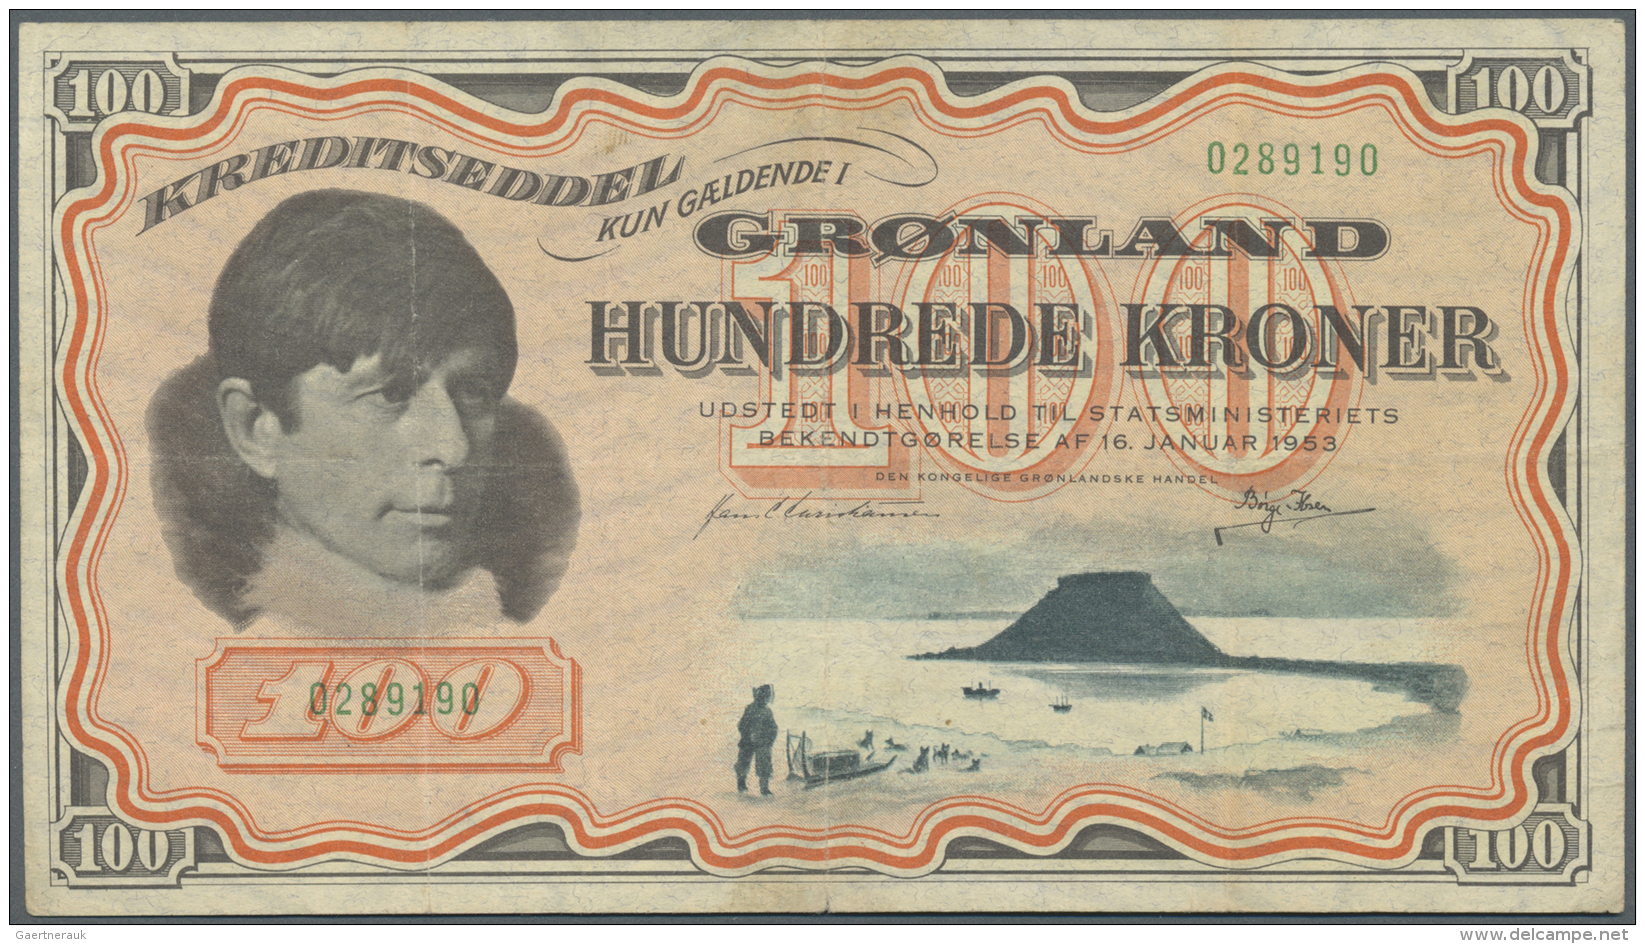 Greenland / Gr&ouml;nland: 100 Kroner 1953 Issued Note, P.21 With Handling Traces, Several Times Folded And Stained On B - Groenland